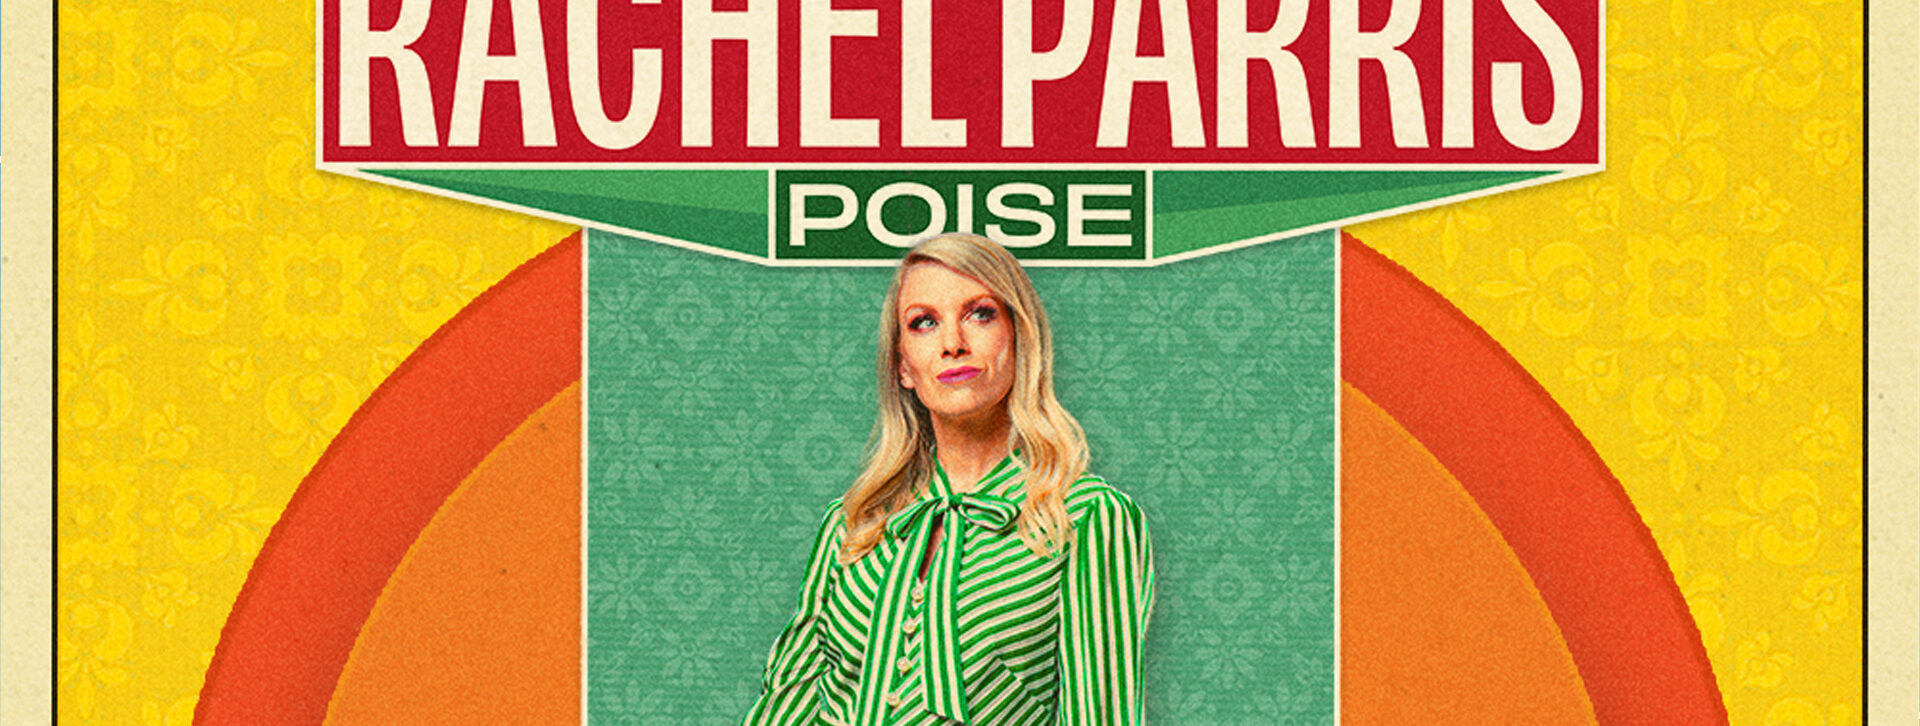 Show and Tell in association with Sophie Chapman Talent presents Rachel Parris: Poise